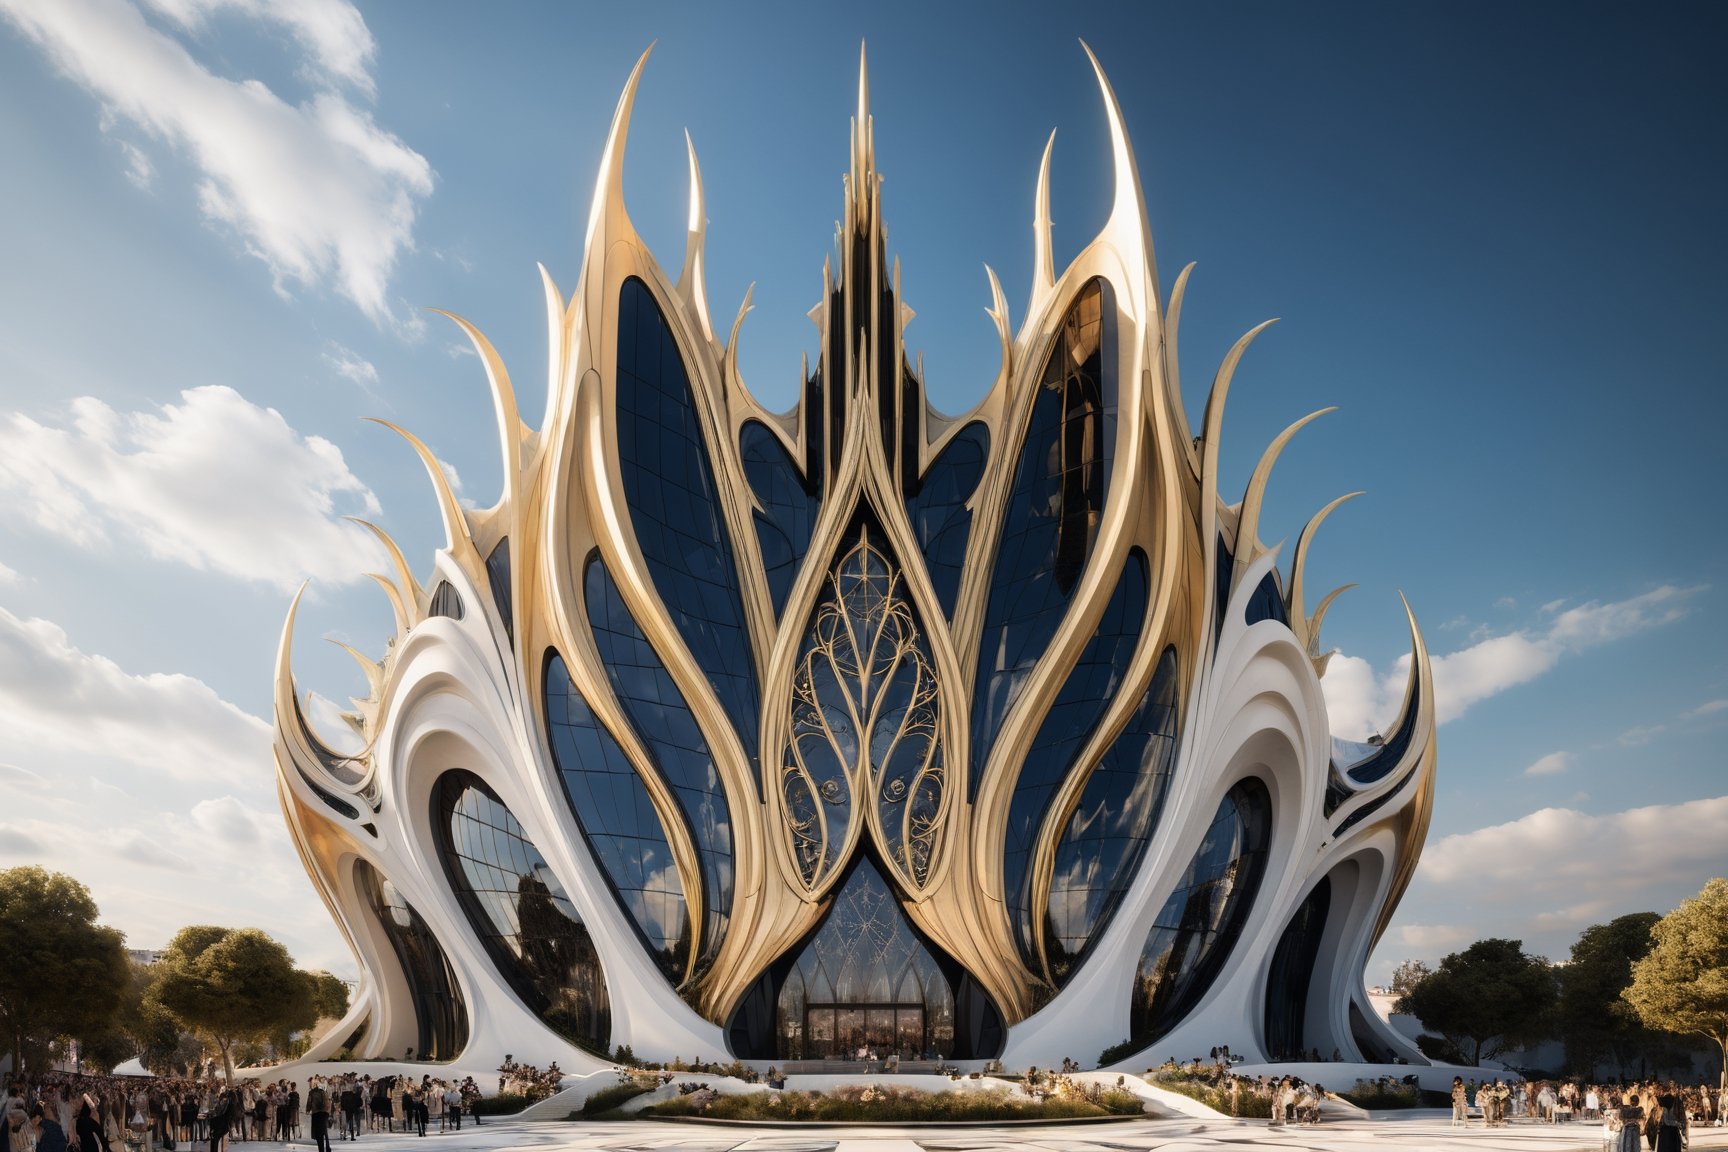 High-definition photorealistic render of an exterior vertical sculptural casttle in parametric architecture, with pointed, dragon-wing-like symmetrical curves inspired by the constructions of Zaha Hadid. A luxurious design featuring marble, glass, and golden metal, with black and white details. The design is inspired by the main stage of Tomorrowland 2022, with ultra-realistic Art Deco details and a high level of intricacy in the image.